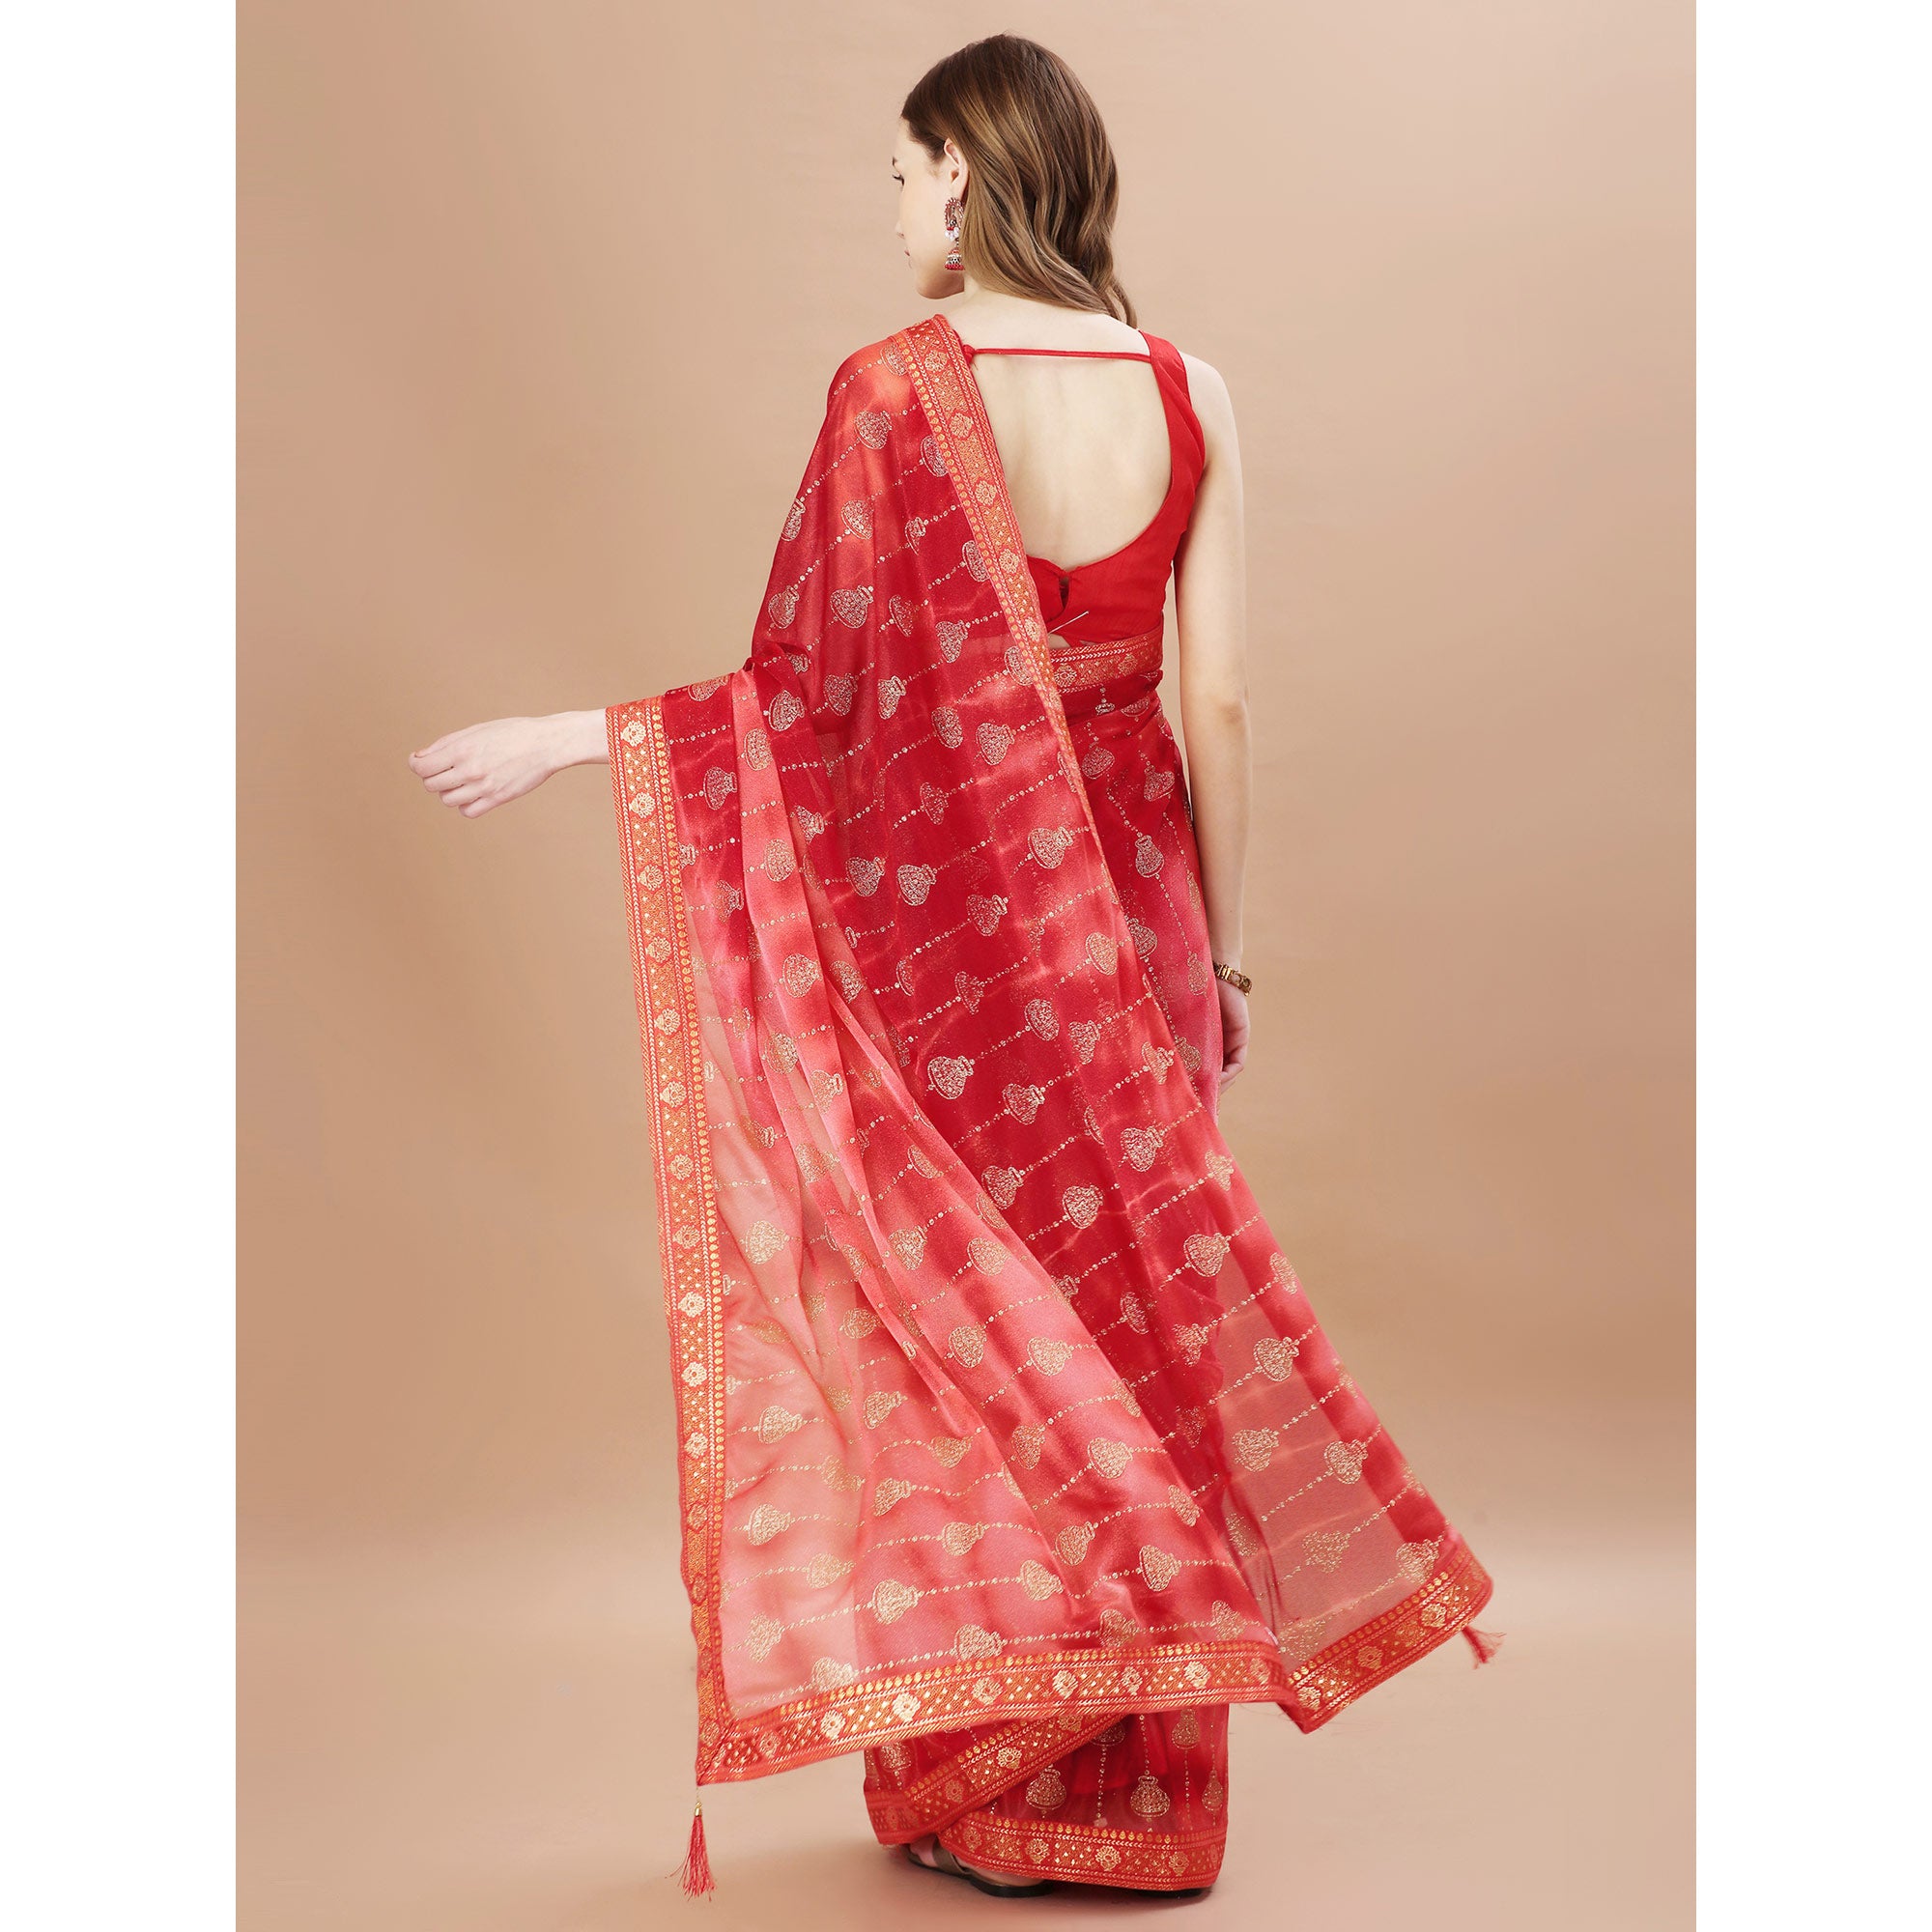 Red Foil Printed Lycra Saree With Lace Border